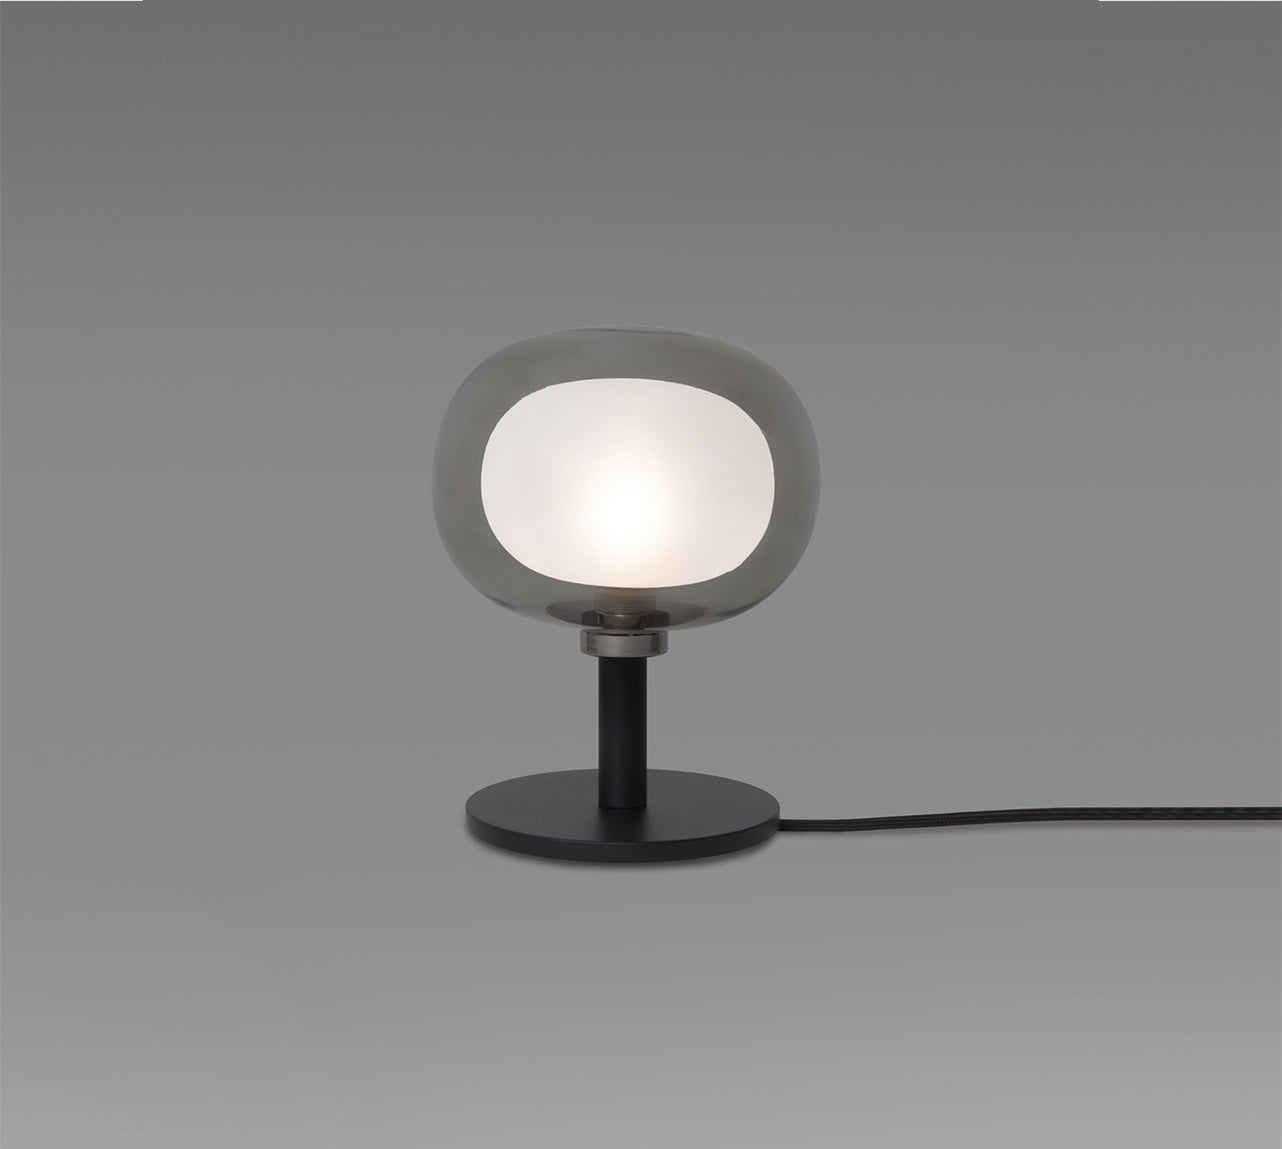 NABILA TABLE LAMP 552.32 BY TOOY from $420.00